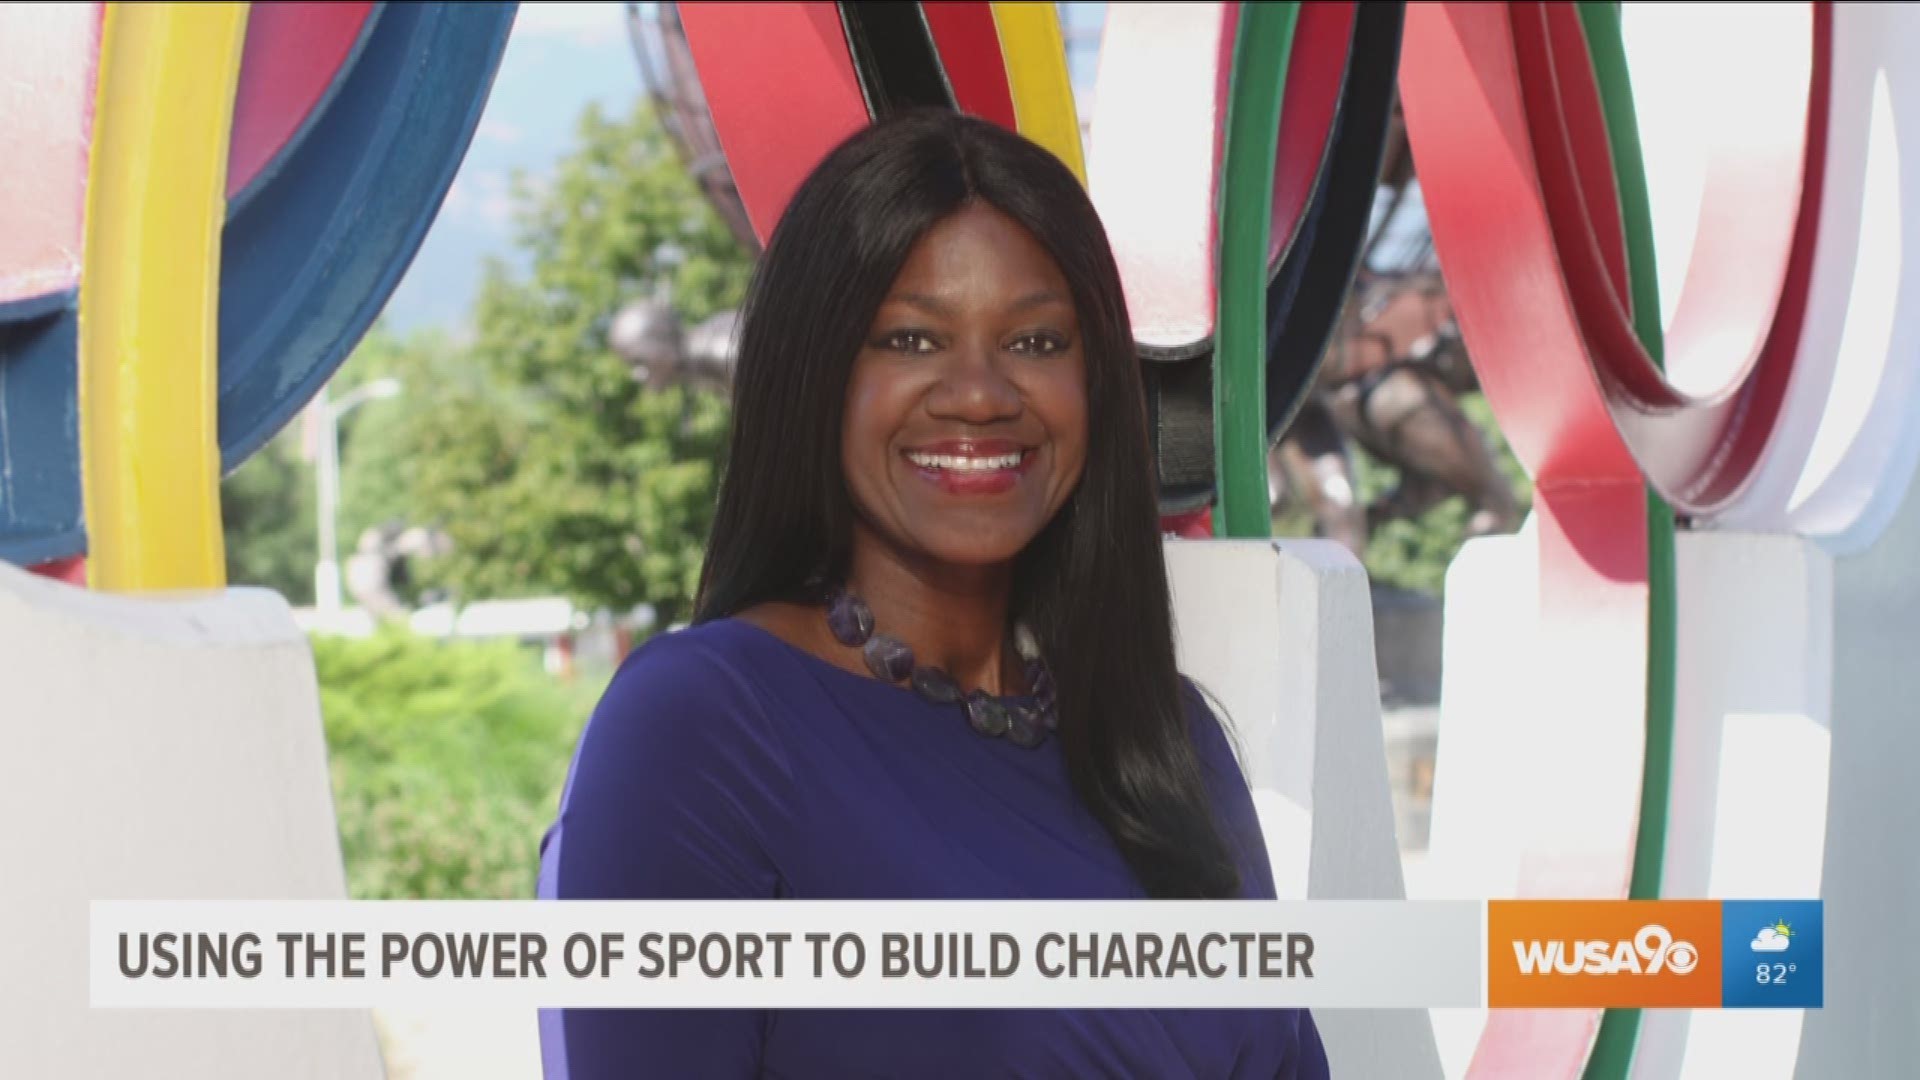 Benita Fitzgerald Mosely, CEO of Laureus Sport for Good Foundation emphasizes on their philosophy that sports can change the world. With a focus on youth sports, she explains how youth athletes can not only empower themselves but also change the world.